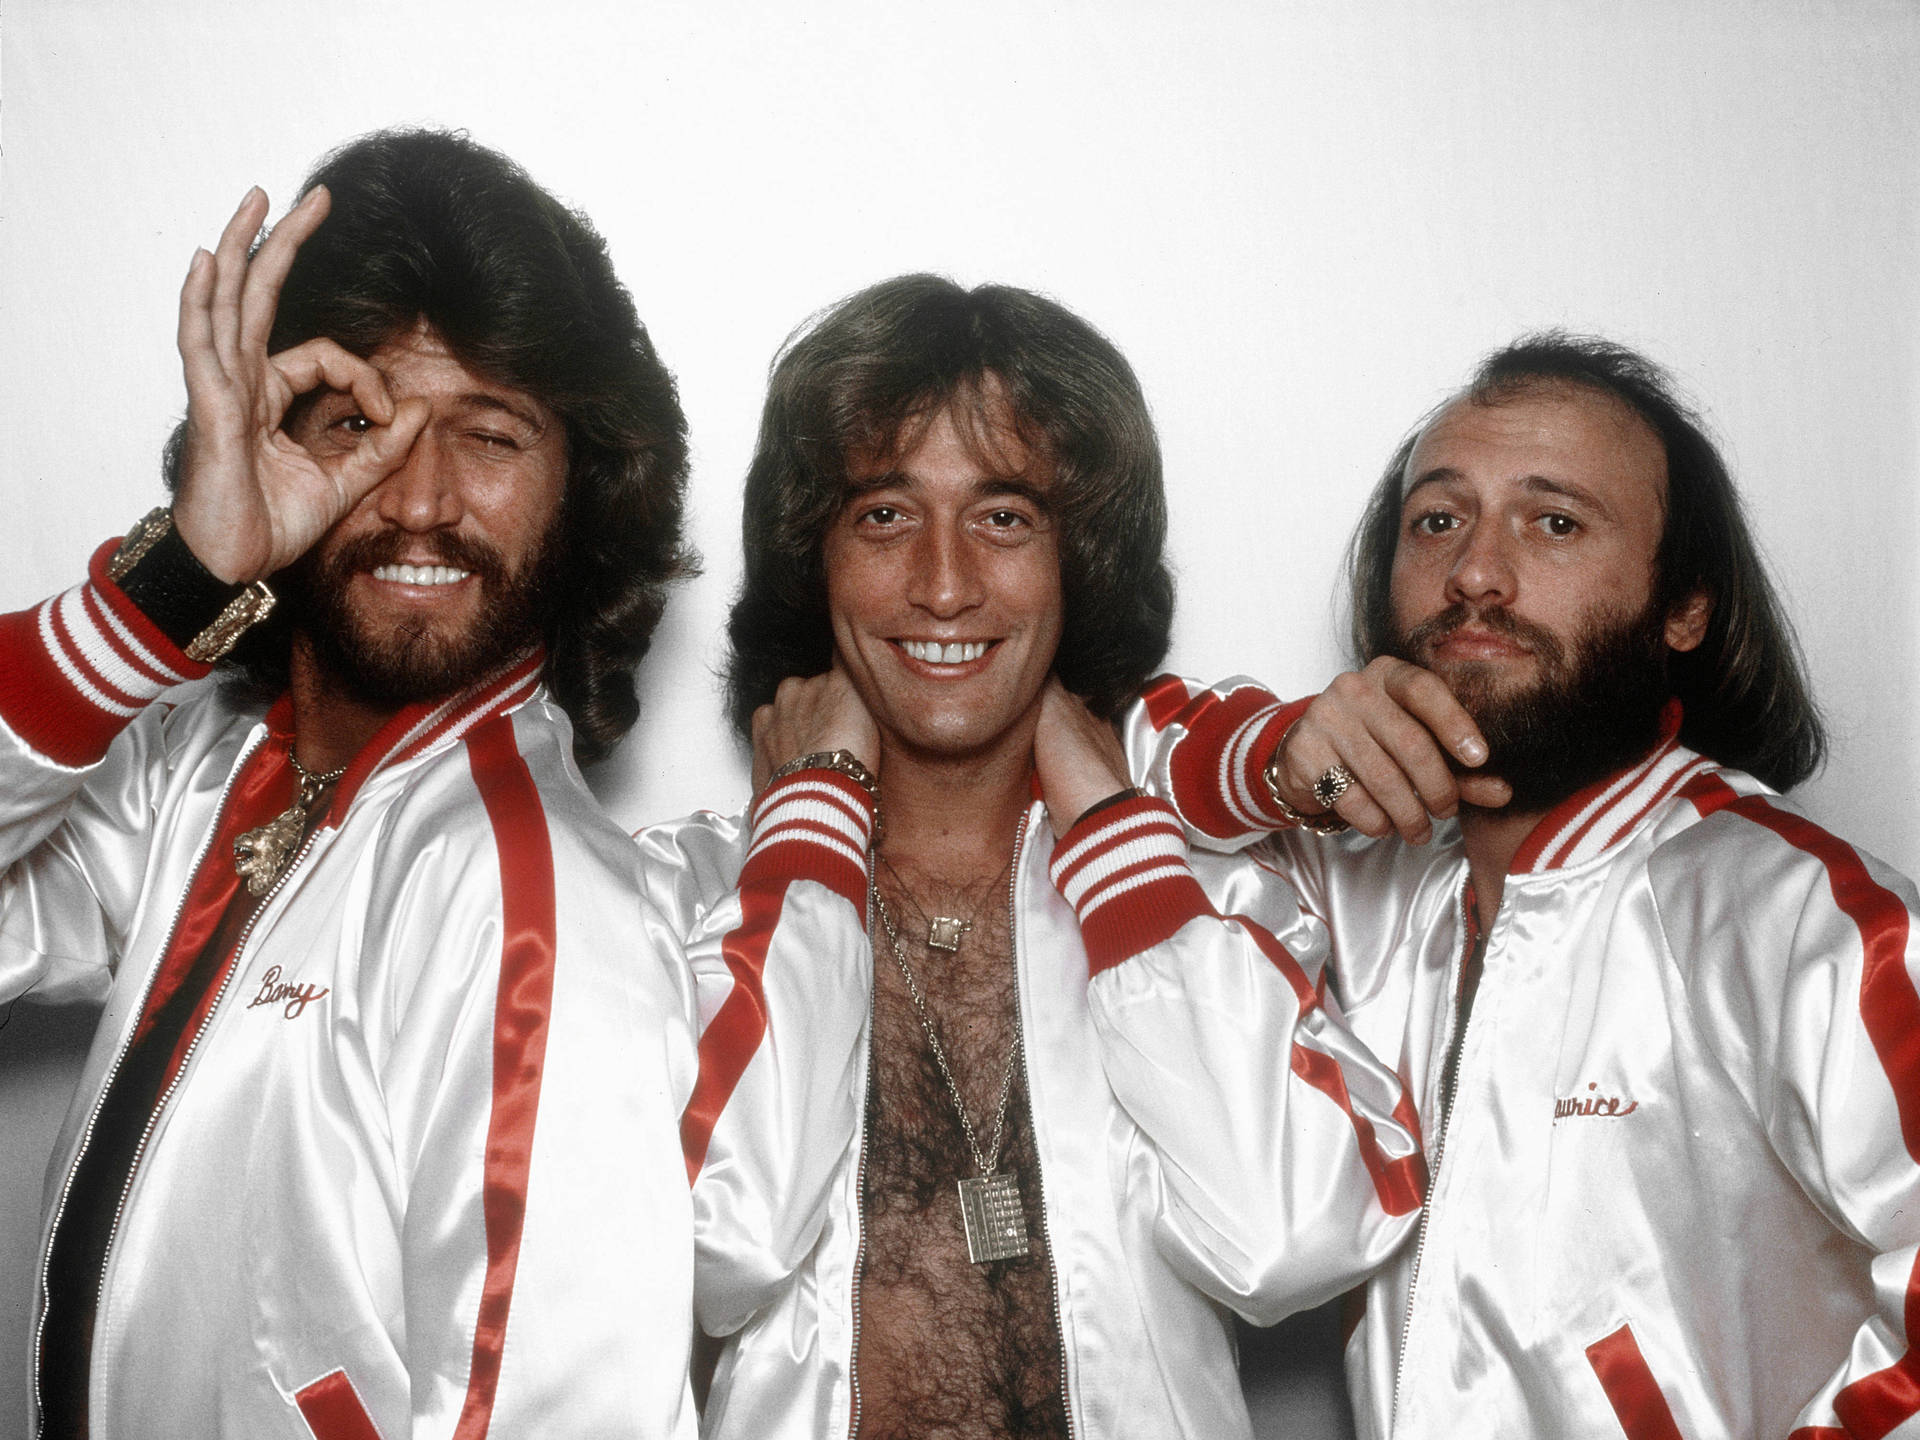 Bee Gees Musical Group Los Angeles 1977 Background